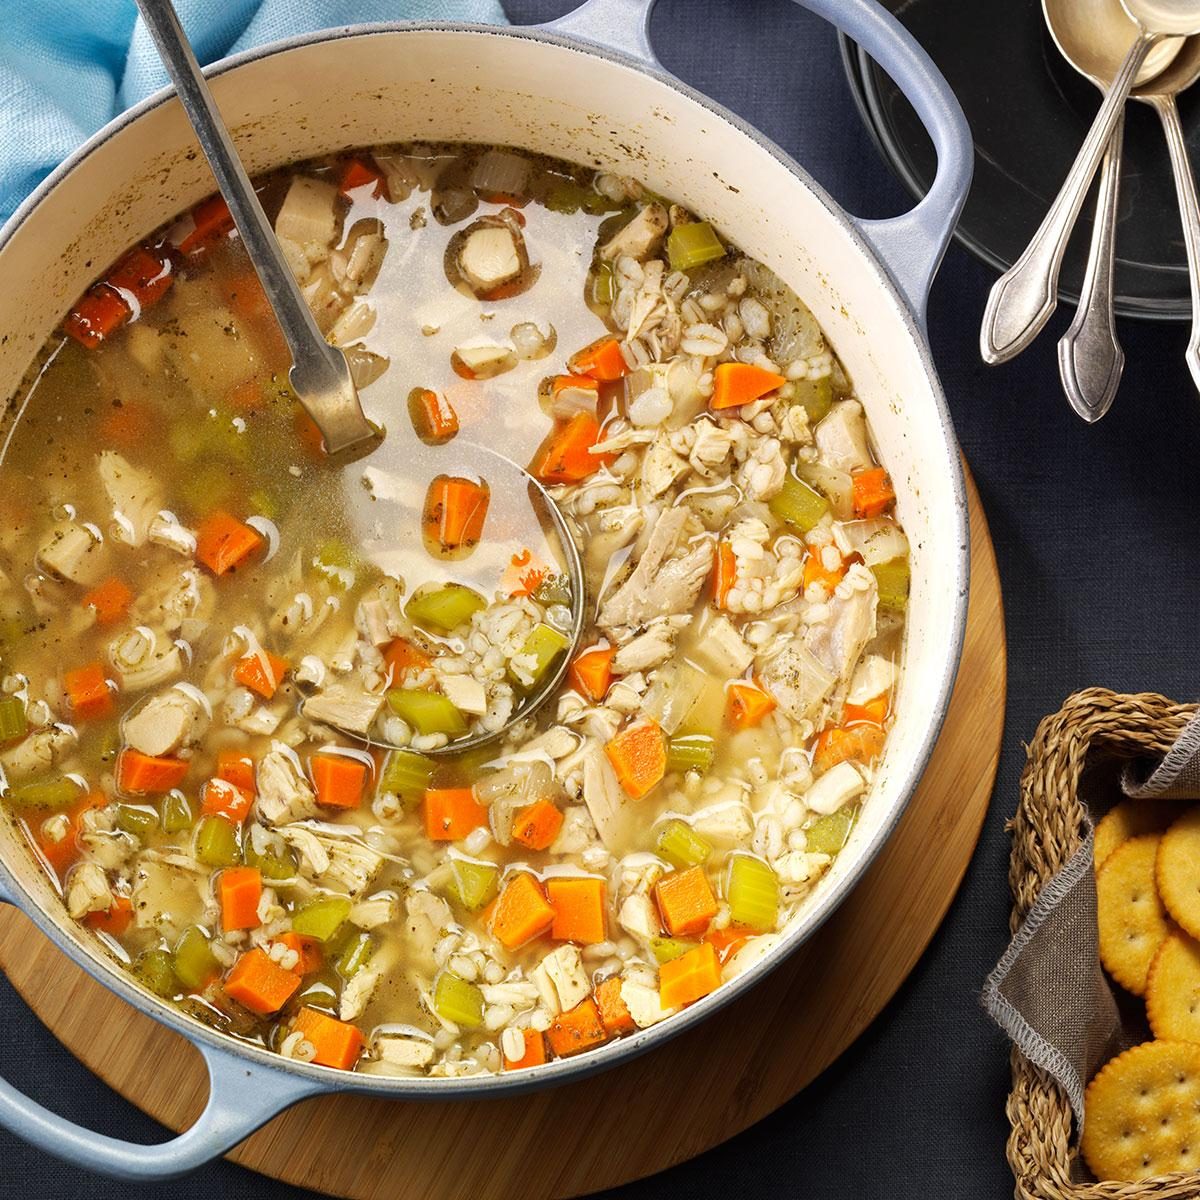 Chicken Barley Soup Recipe: How to Make It